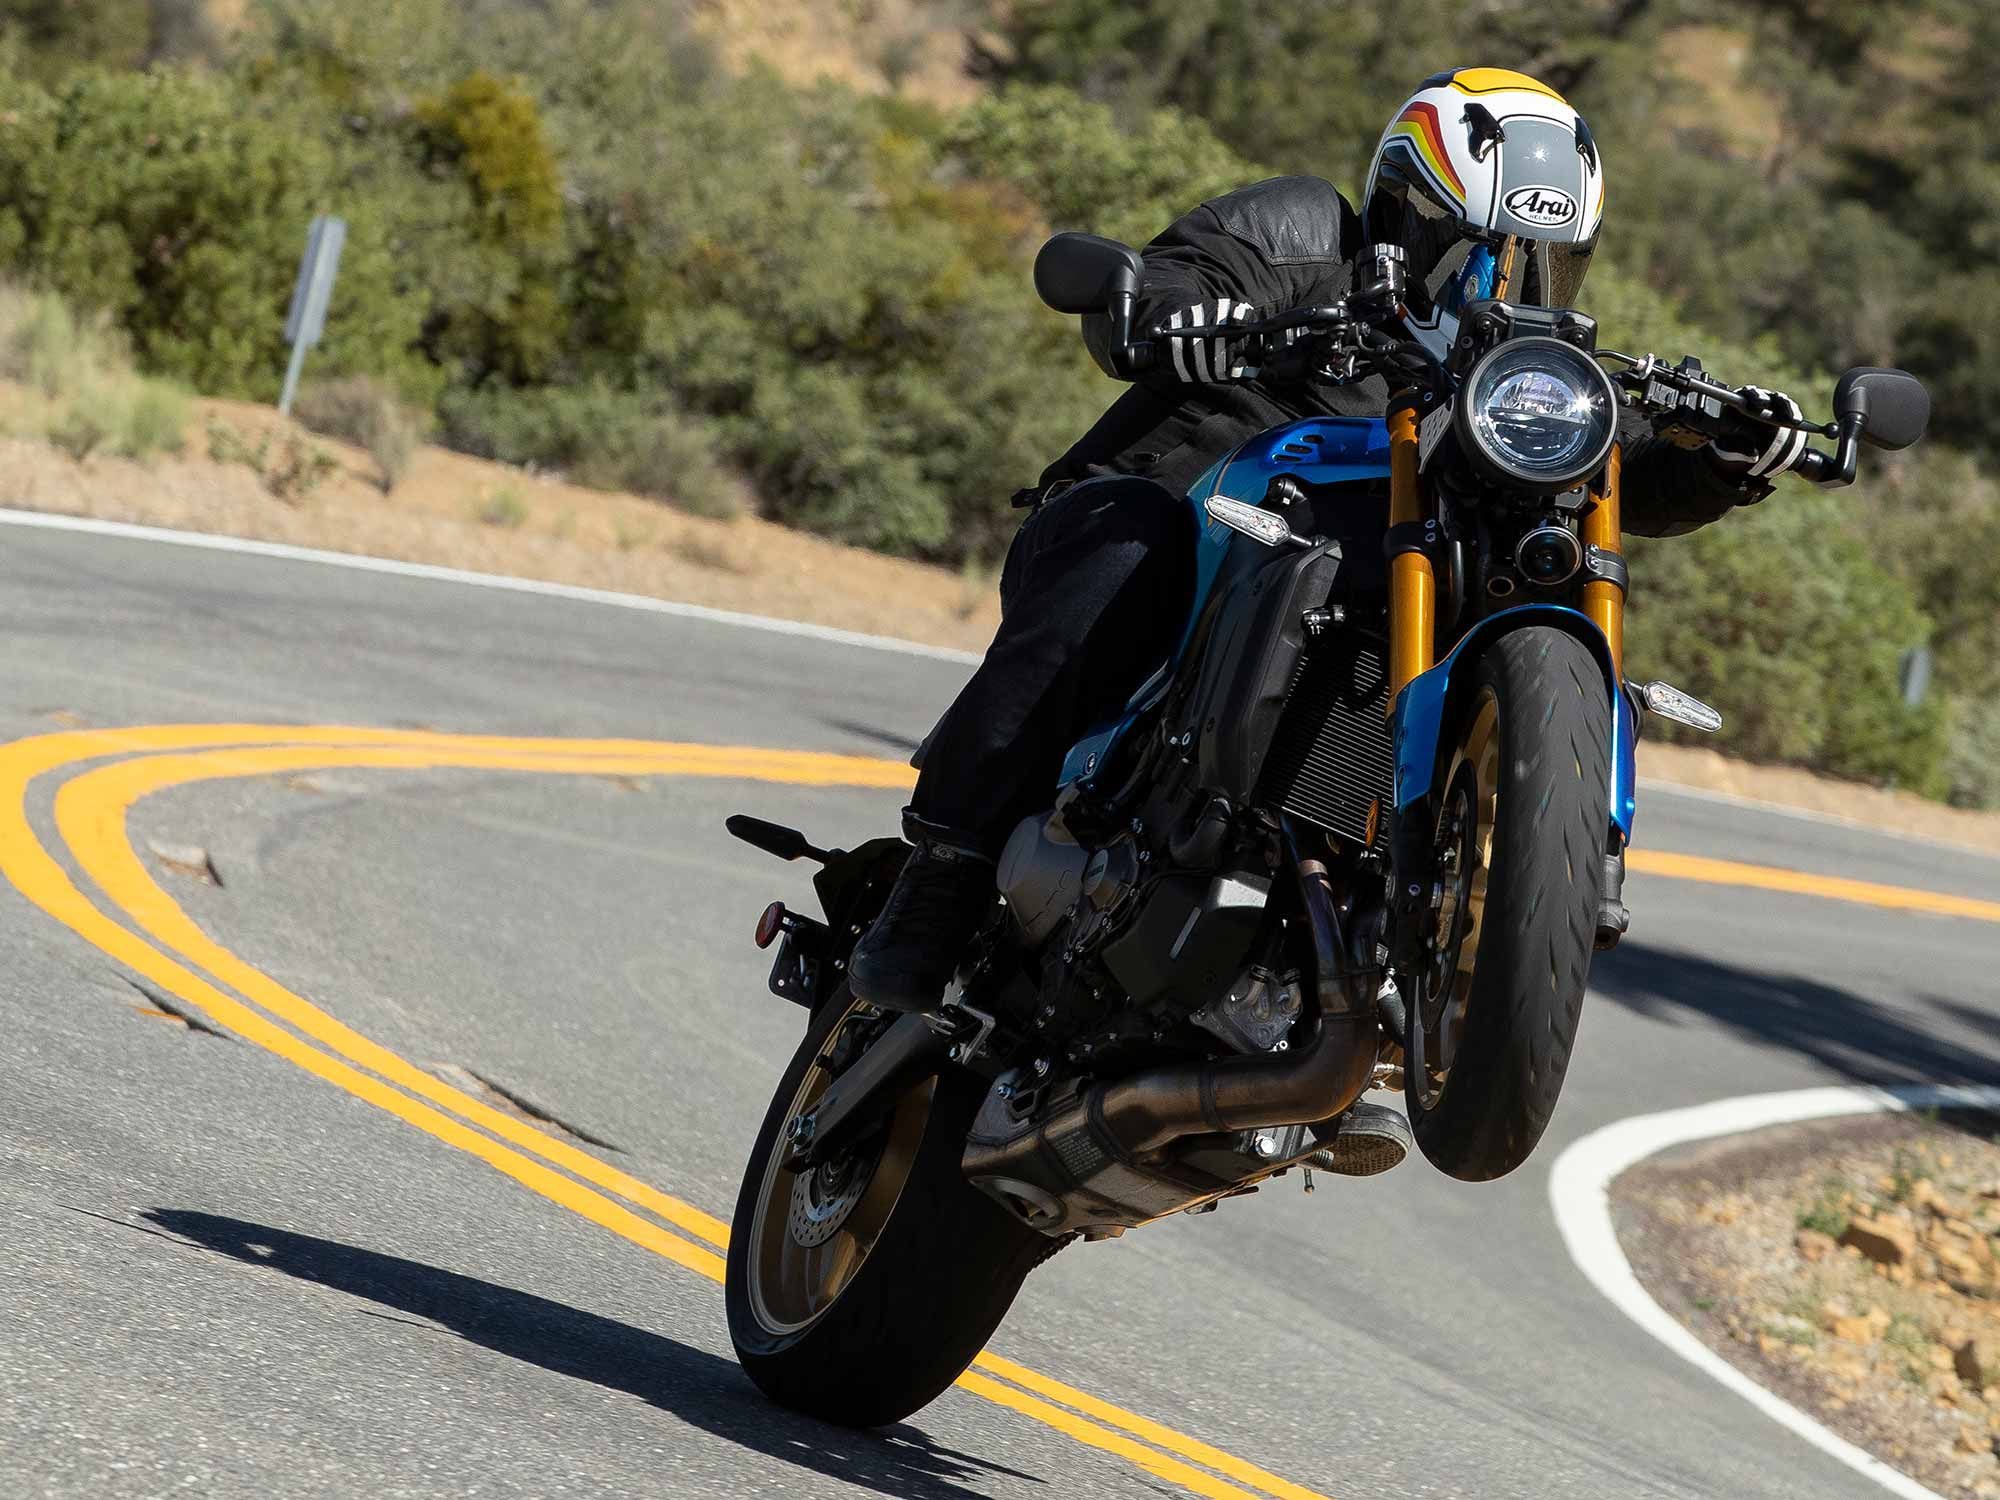 Yamaha’s 2022 XSR900 is 90 percent new and more refined, but it still has its wild side.